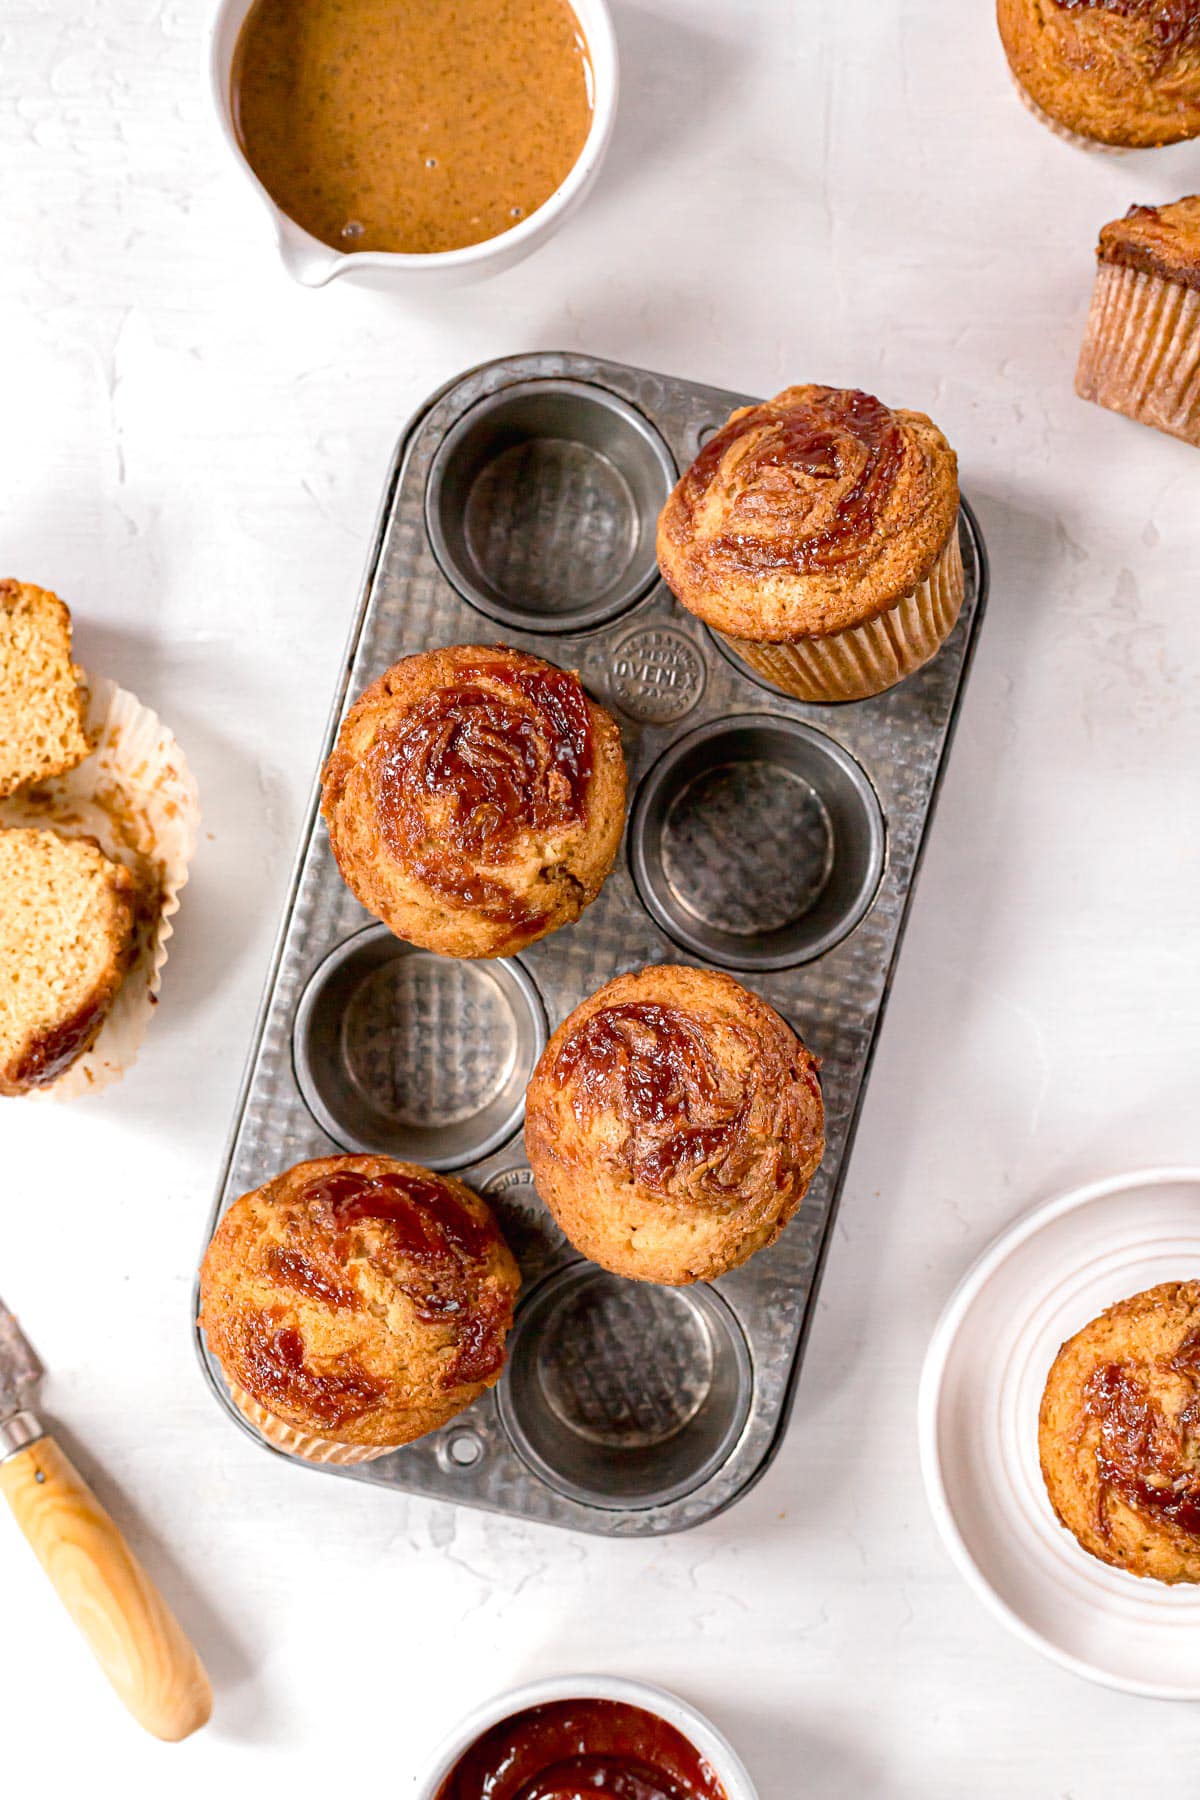 almond butter and guava jelly muffins in a muffin tin on a white surface